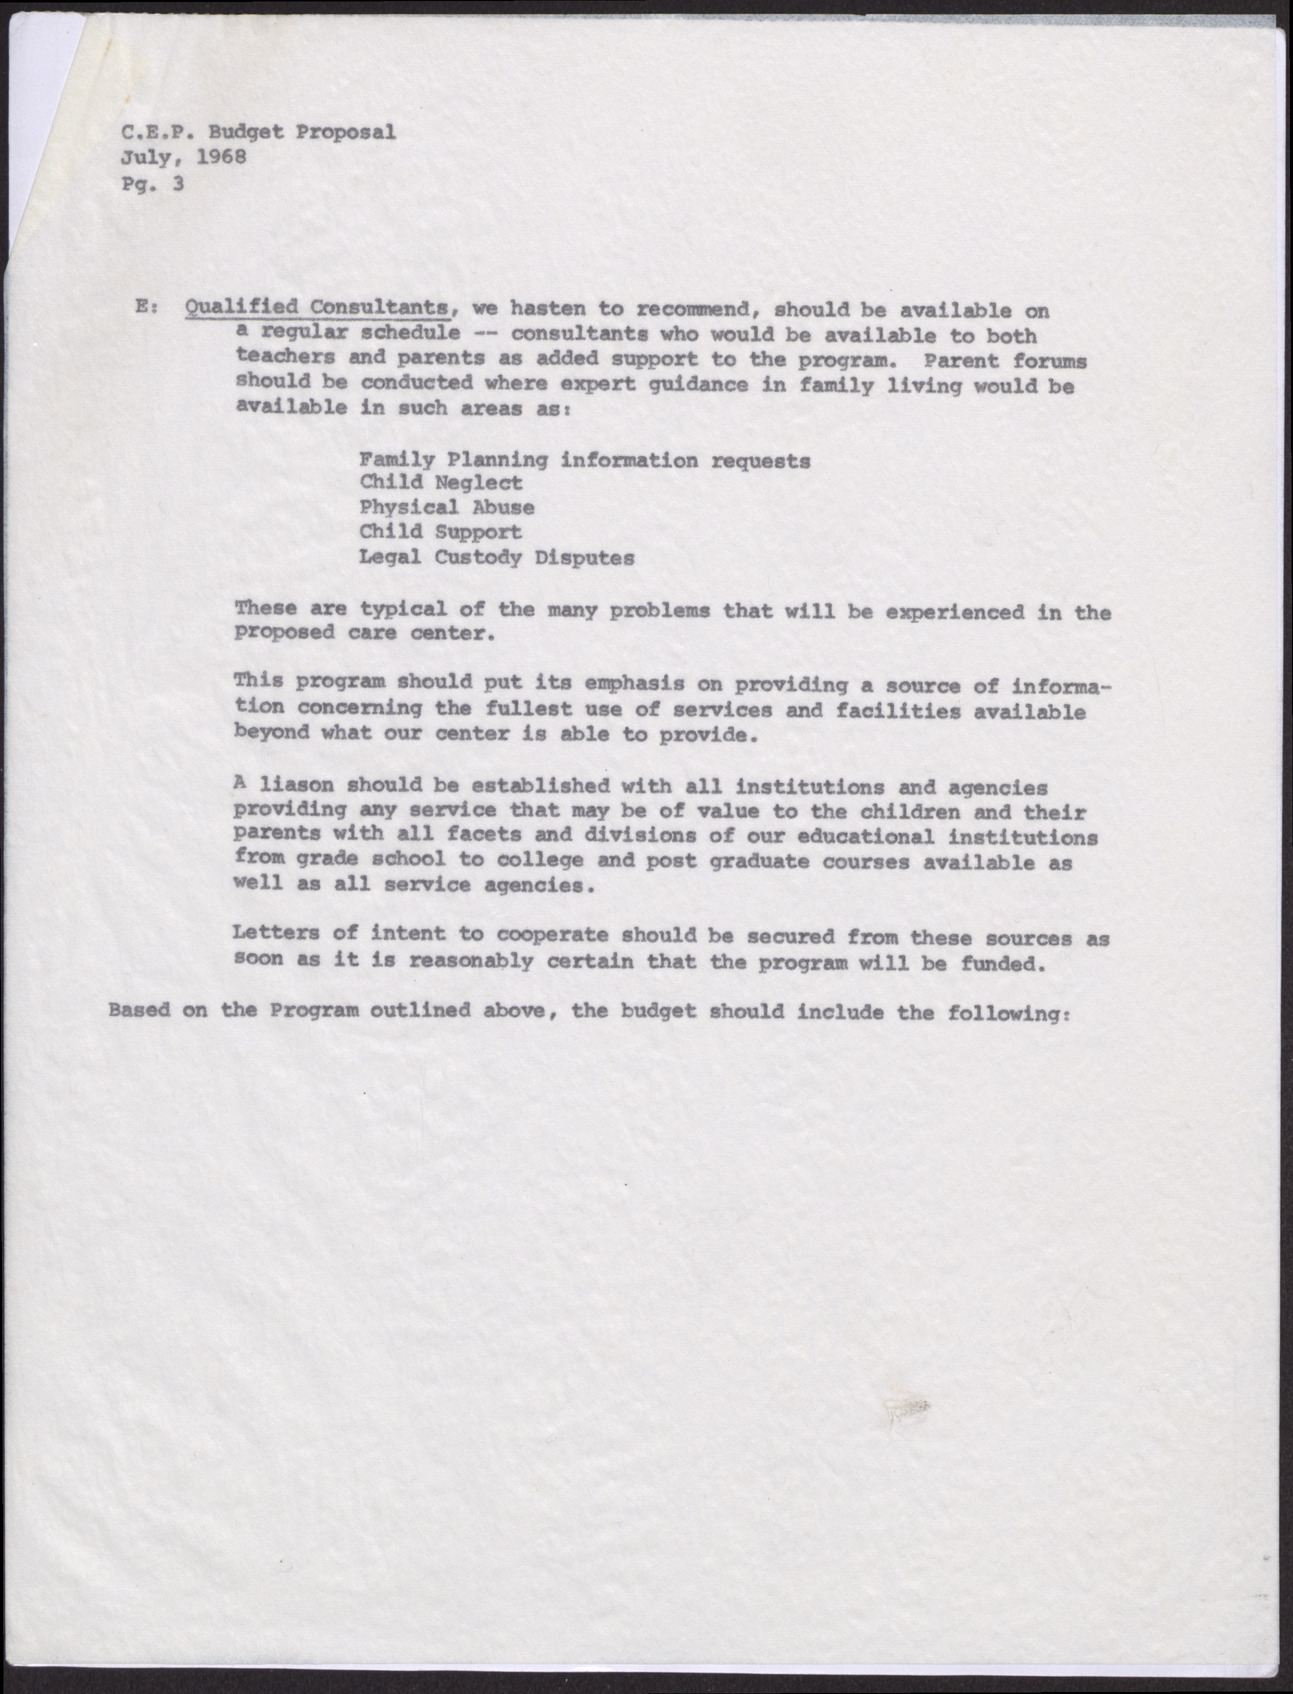 Budget Proposal to the EOB from Operation Independence (5 pages), July 1968, page 3